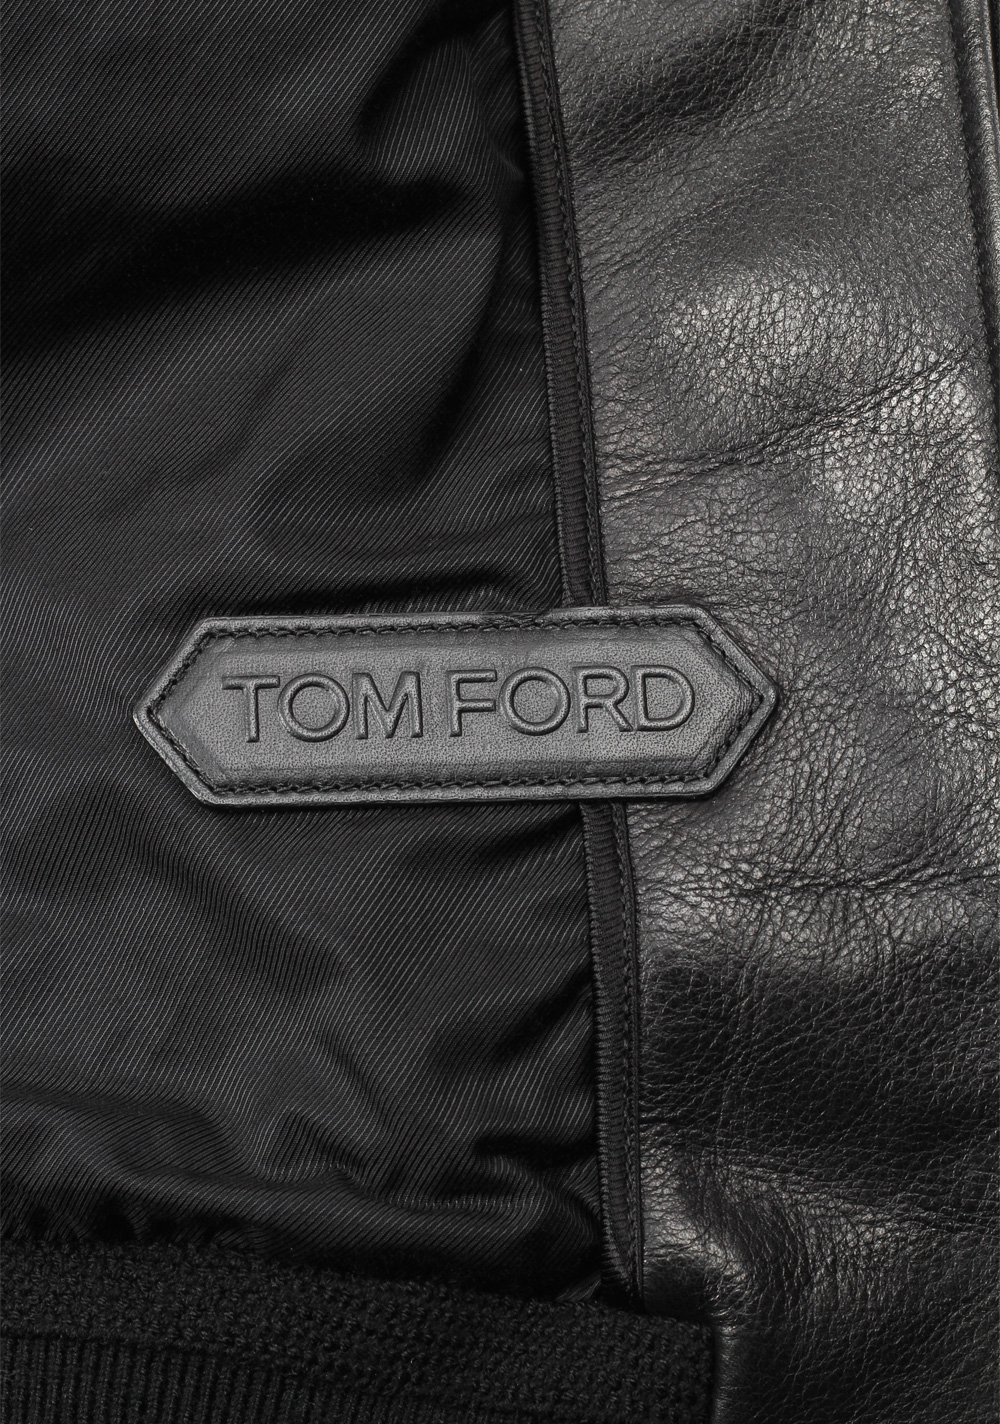 TOM FORD Black Leather Jacket Coat Size 52 / 42R U.S. Outerwear ...